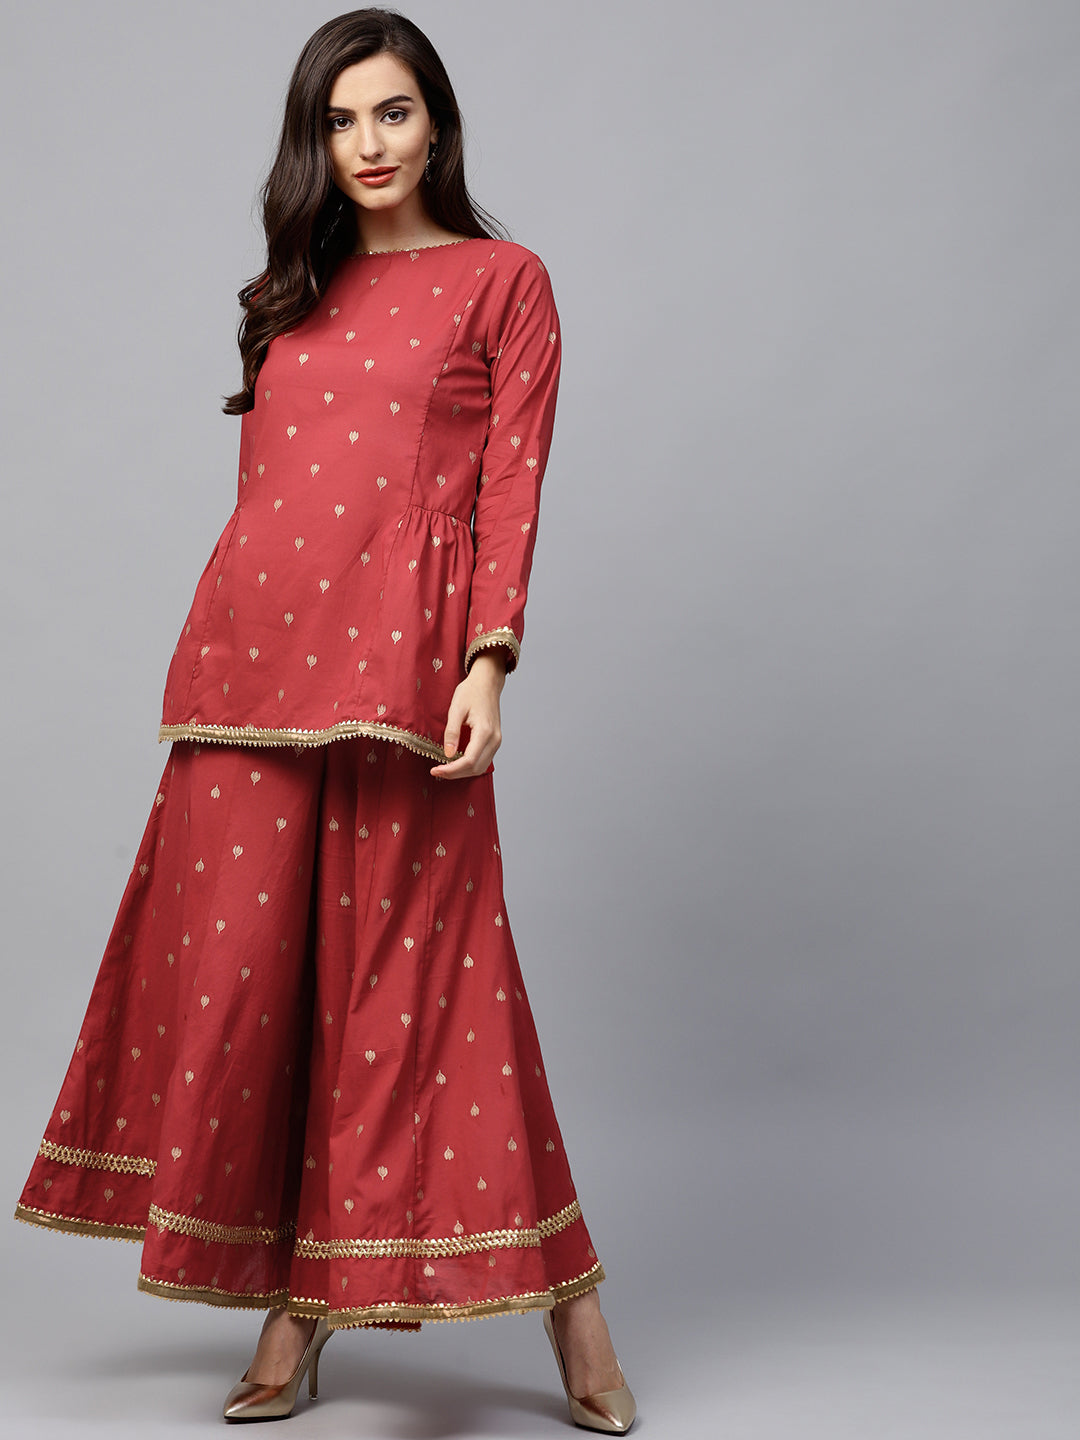 Red And Golden Printed Kurta With Palazzos.